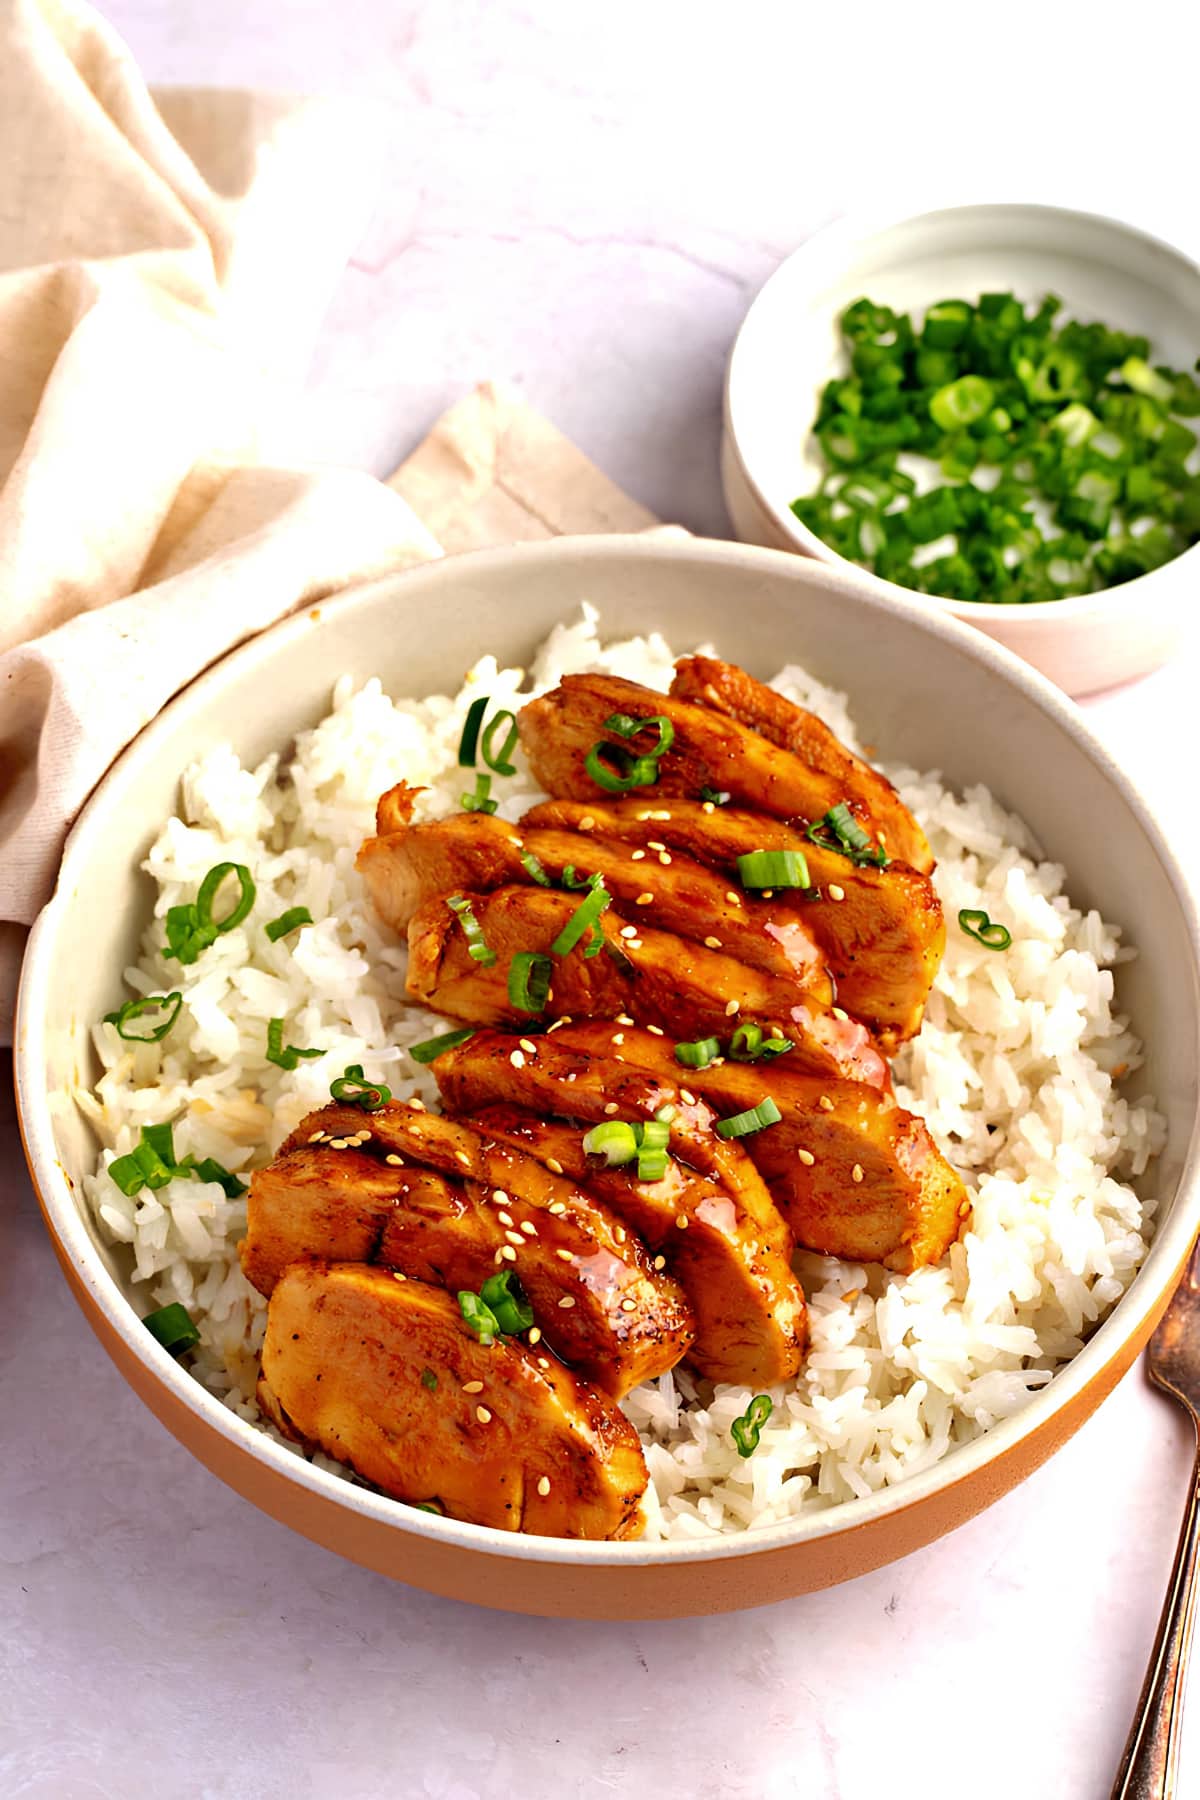 A bowl of savory chicken with rice, topped with green onions, garnished with soy glaze